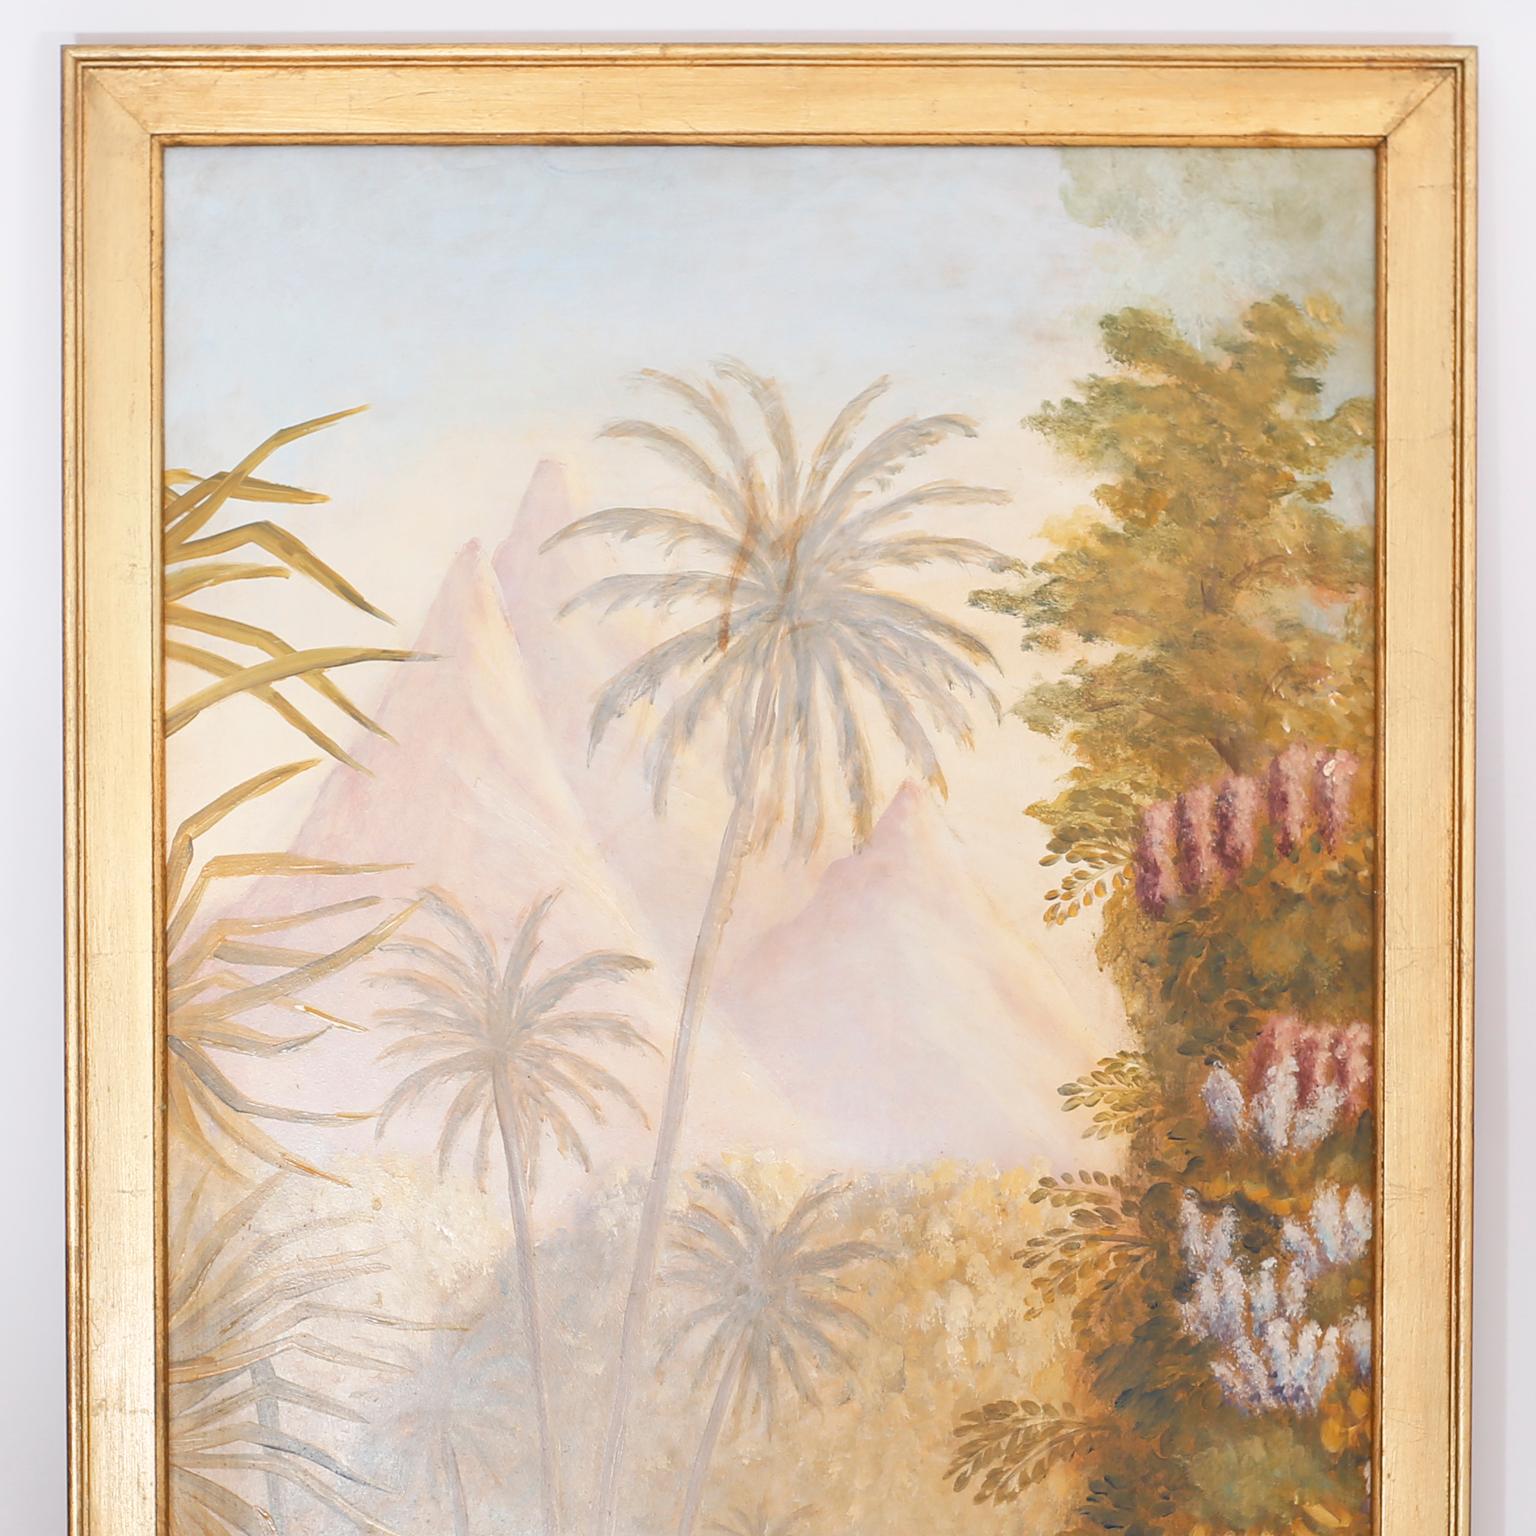 Pair of oil paintings on board of jungle scenes with mountains, rivers, Palm Trees, flowers, and exotic plant species executed in a misty technique that captures the heat and dreamy quality of a rain forest.